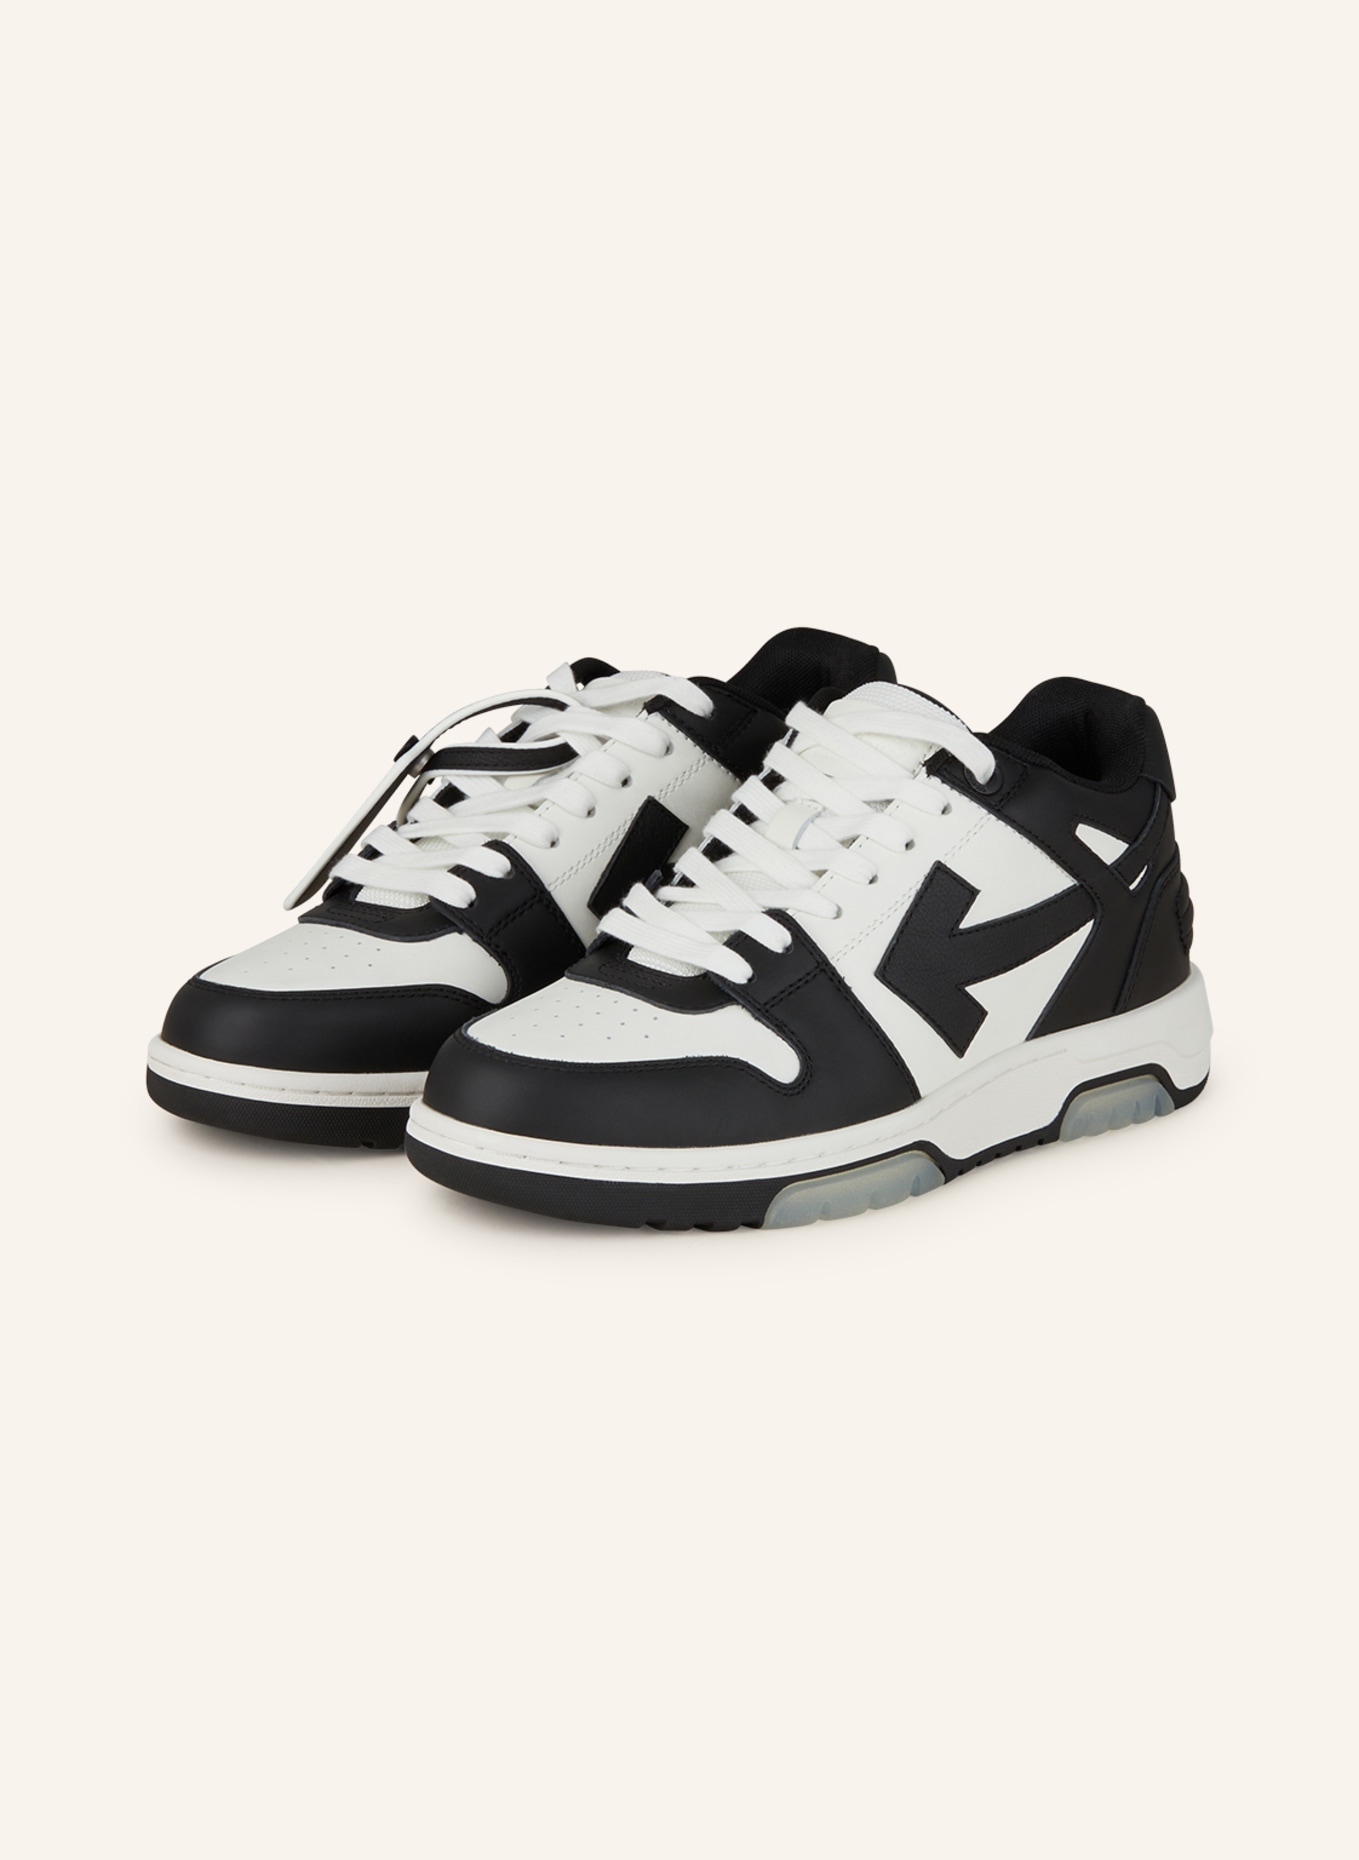 Off-White Black & White 3.0 Off Court Sneakers